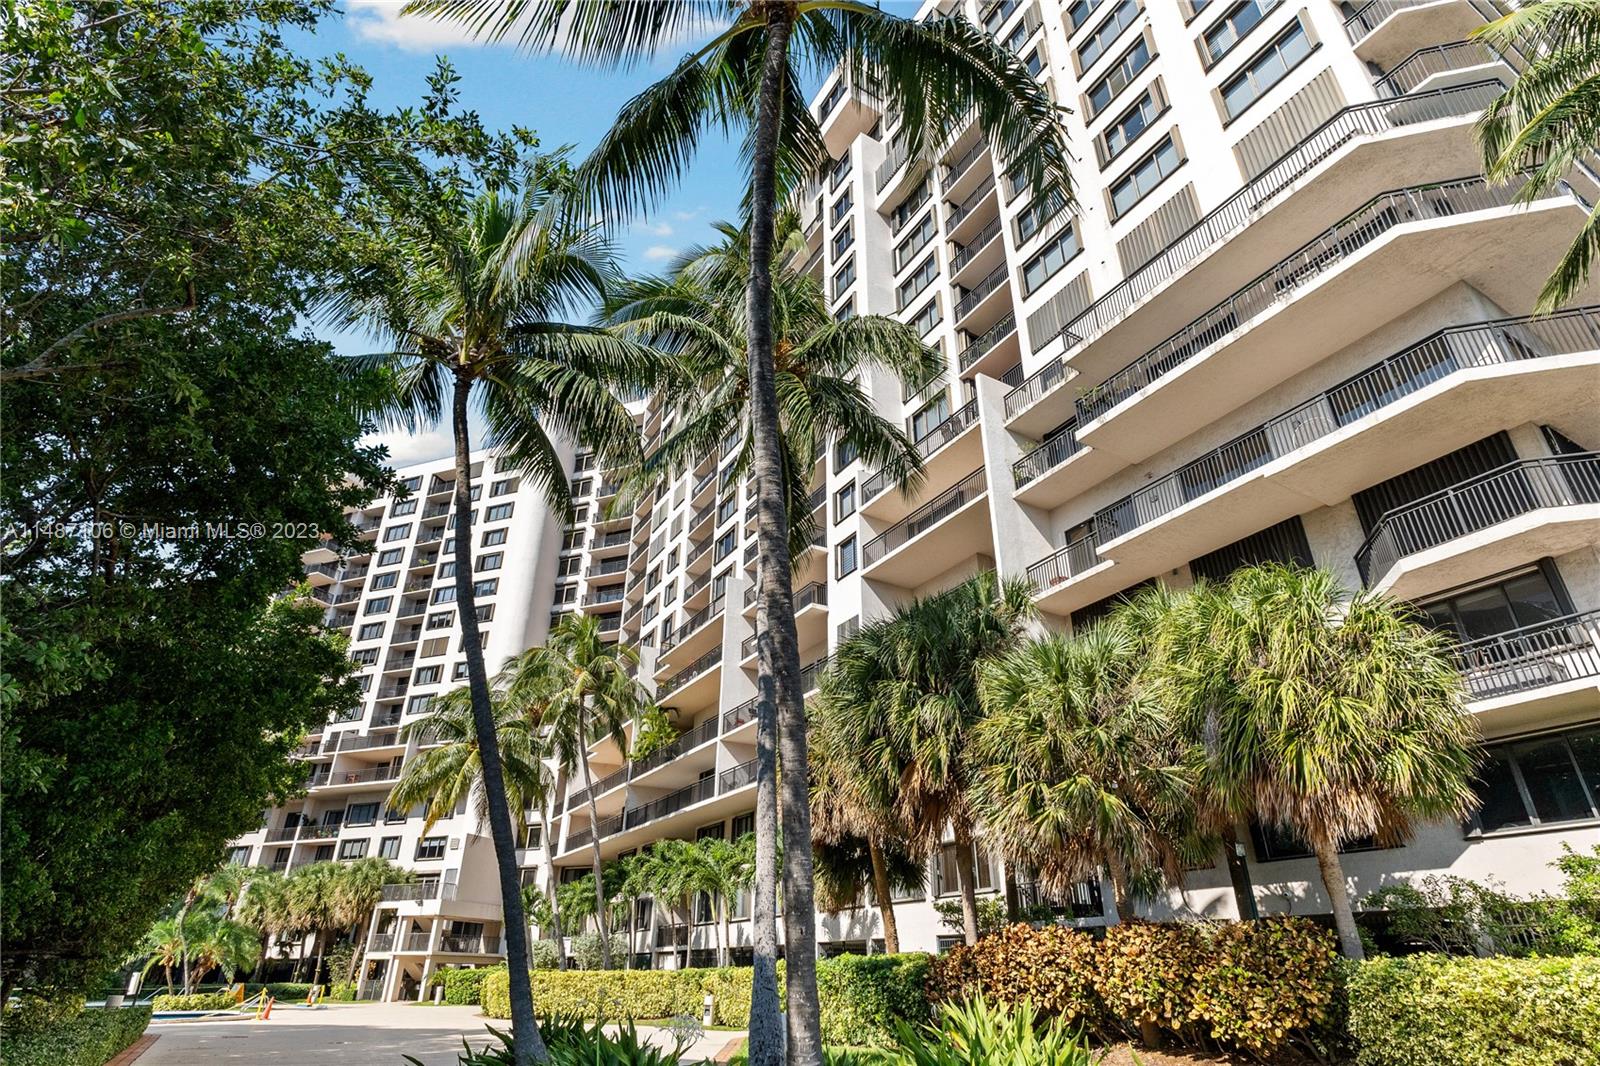 Live in your own private Island. Enjoy this spacious 1 bedroom/ 1.5 bath apartment with very large terrace in exclusive Brickell Key. Washer/Dryer in unit. One assigned parking space. Resort style amenities including heated saltwater pool,, jacuzzi, tennis, racquetball, gym, child play area, 24hr concierge, convenience store at lobby level and more. Located in the heart of Brickell, steps away from best dining and shopping.